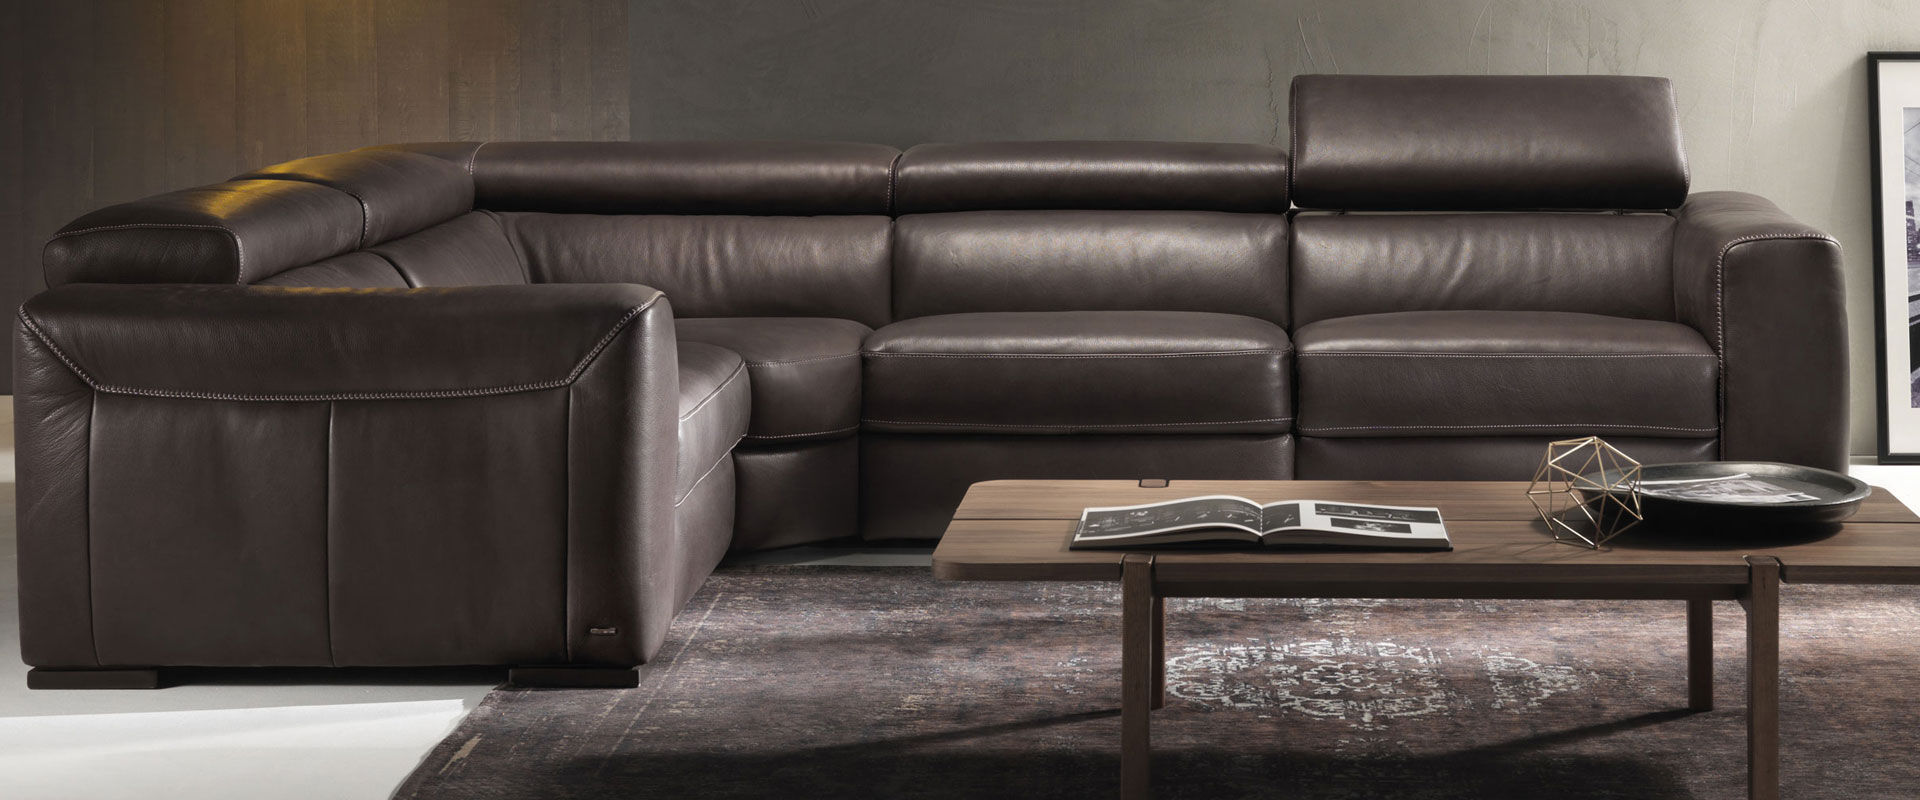 amalfi leather sectional sofa with chaise